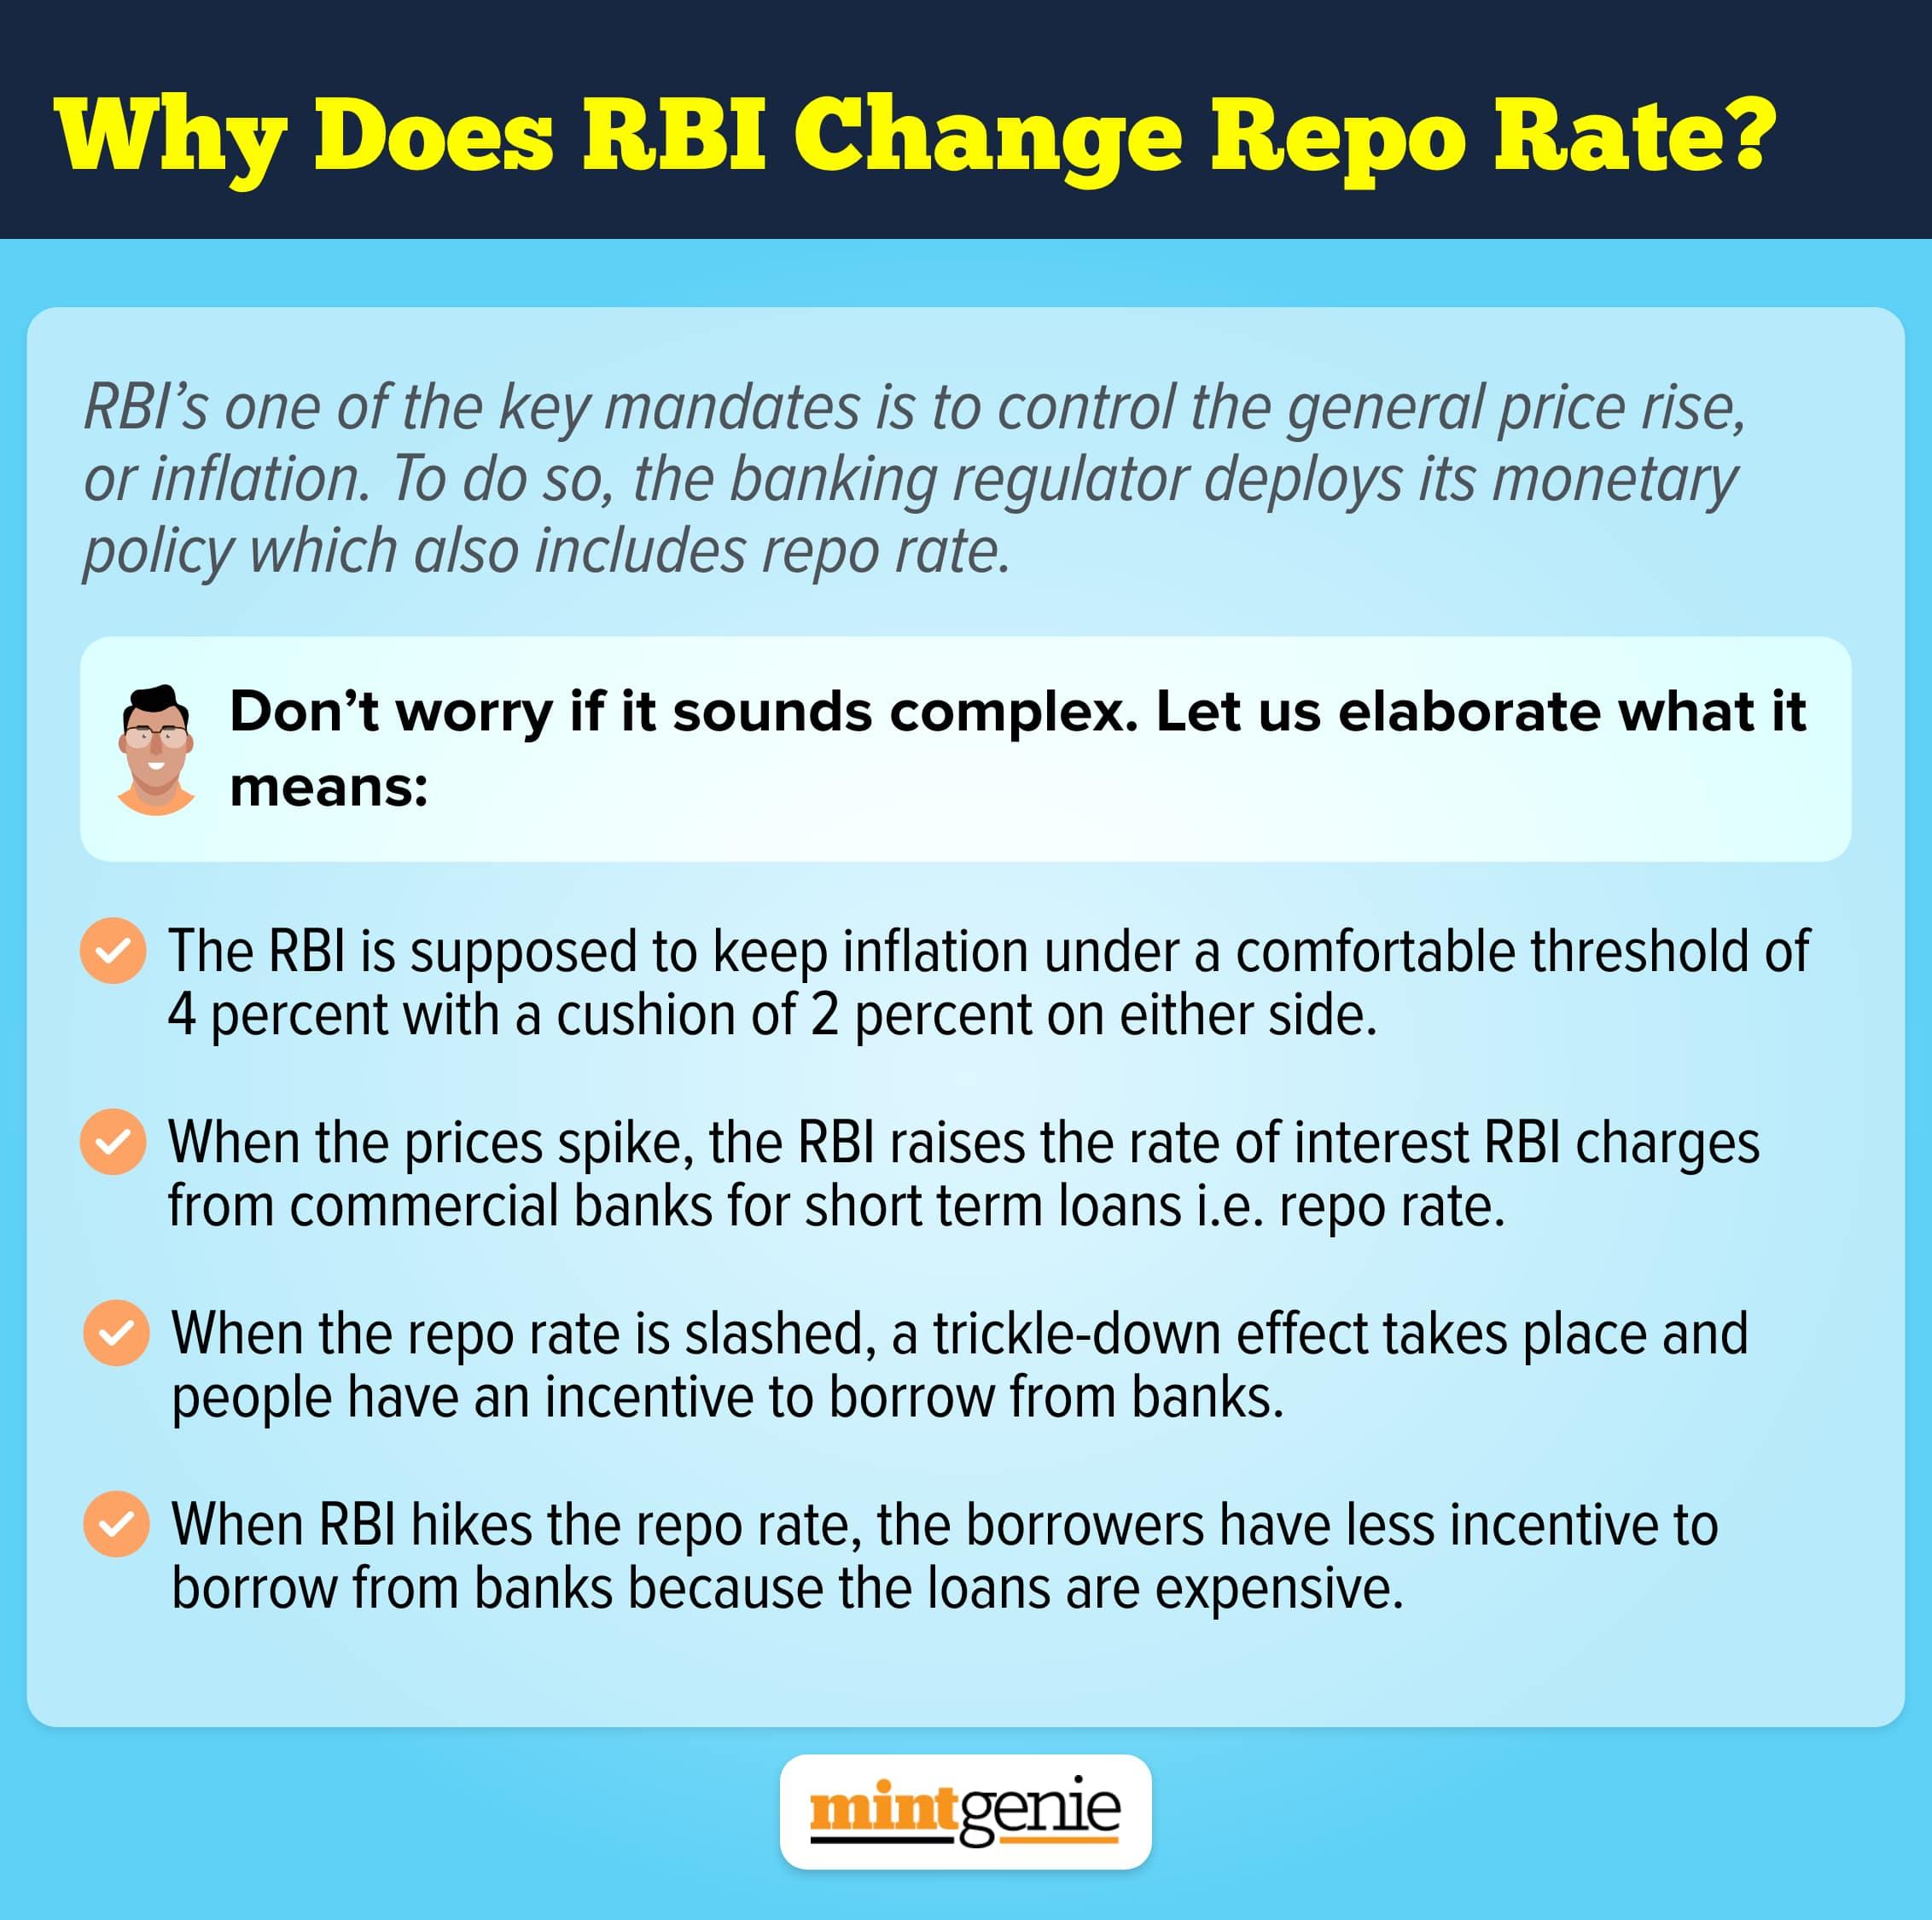 Why does RBI change repo rate?